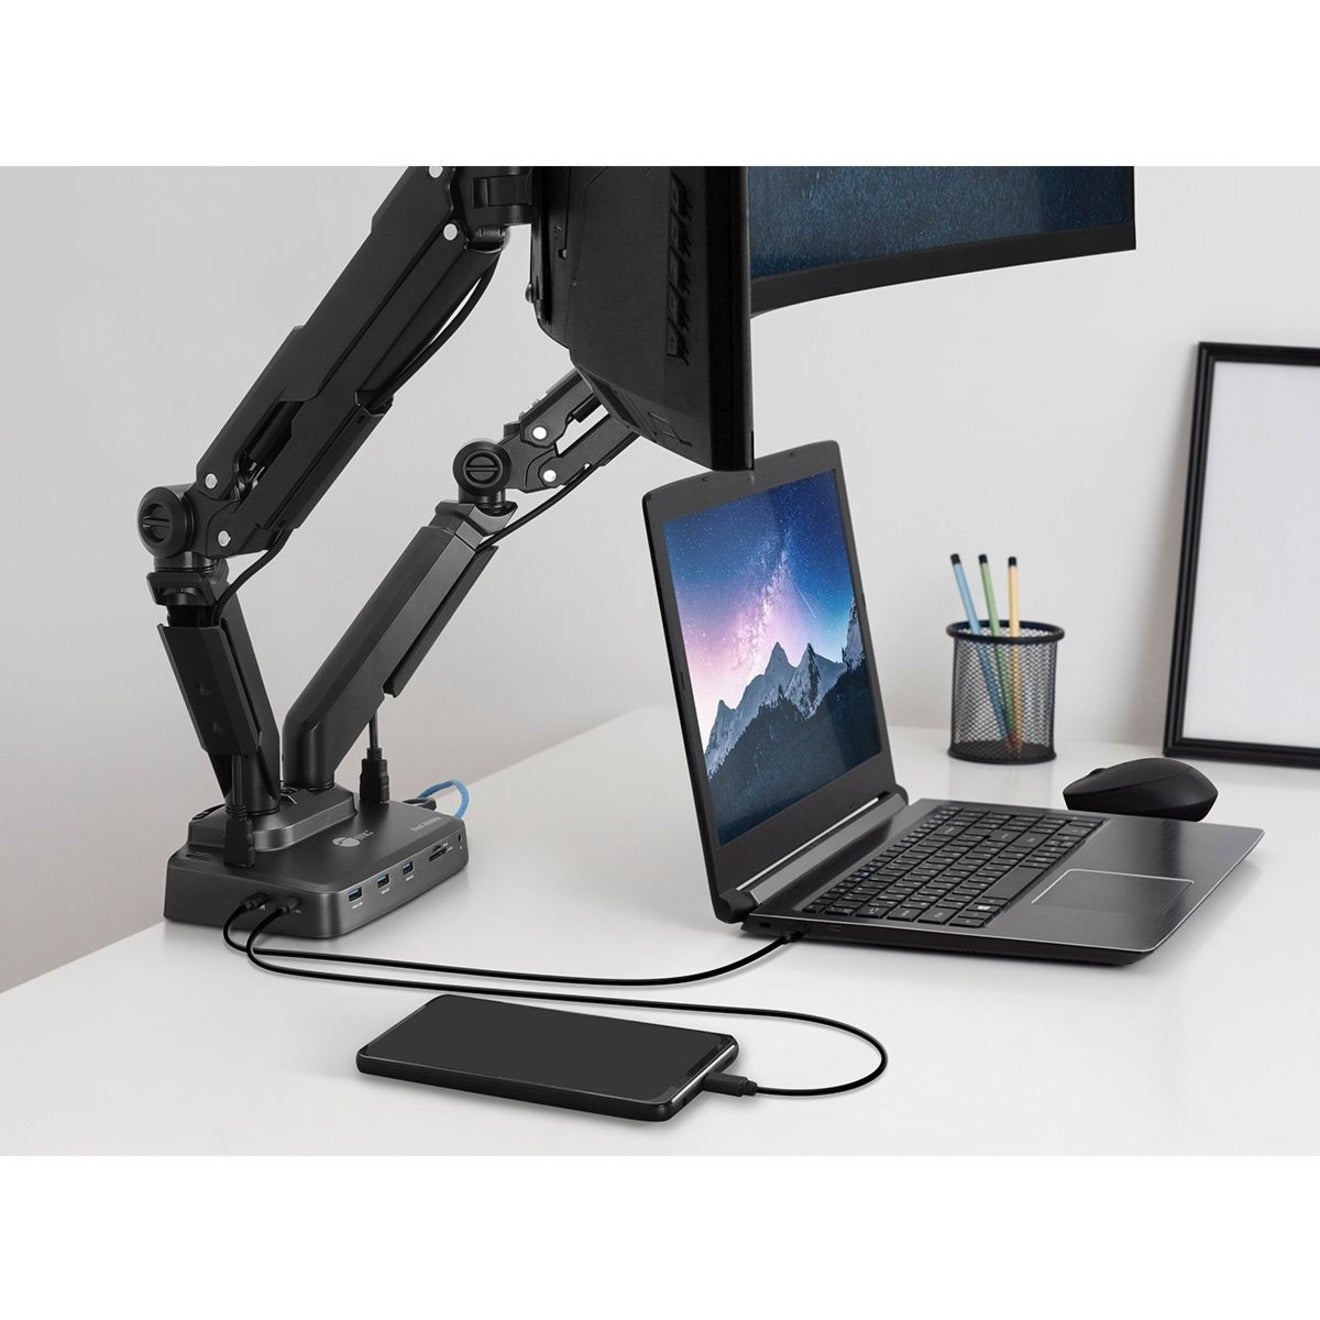 SIIG CE-MTDK01-S1 Dual Gas Spring Monitor Arm Desk Mount with 4K Docking Station & PD, Space Gray/Black, Office/Home/Notebook/TV